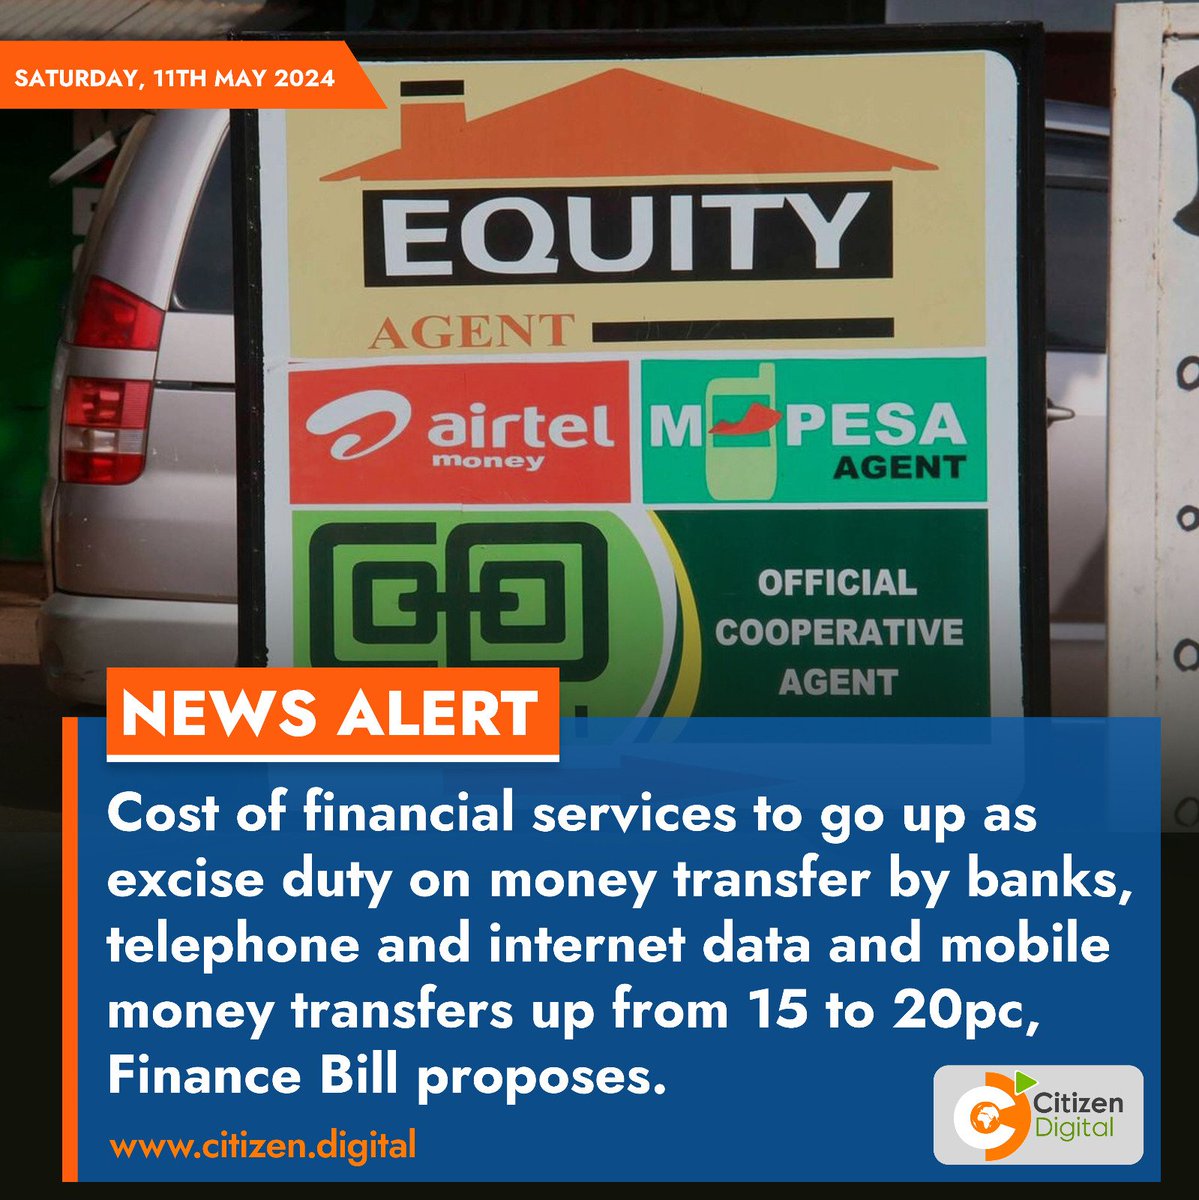 Cost of financial services to go up as excise duty on money transfer by banks, telephone and internet data and mobile money transfers up from 15 to 20pc, Finance Bill proposes.